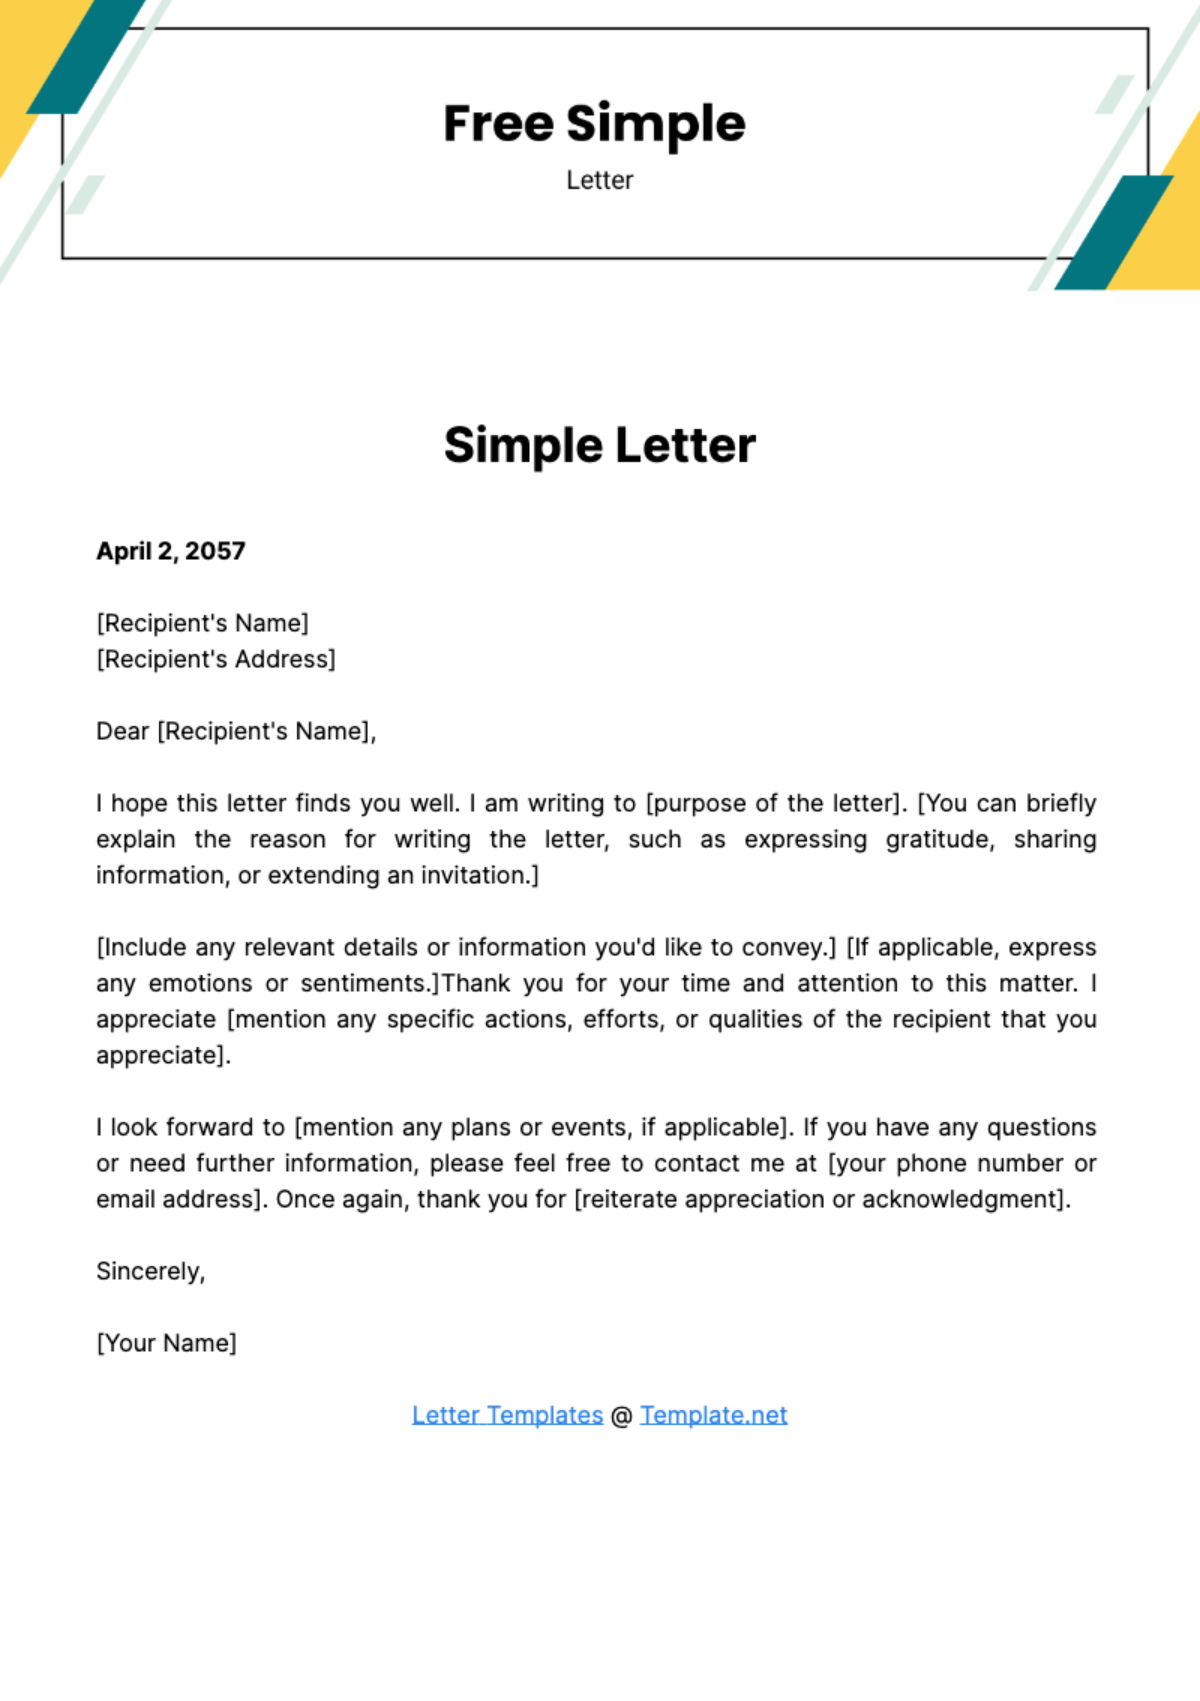 Free Simple Letter Template